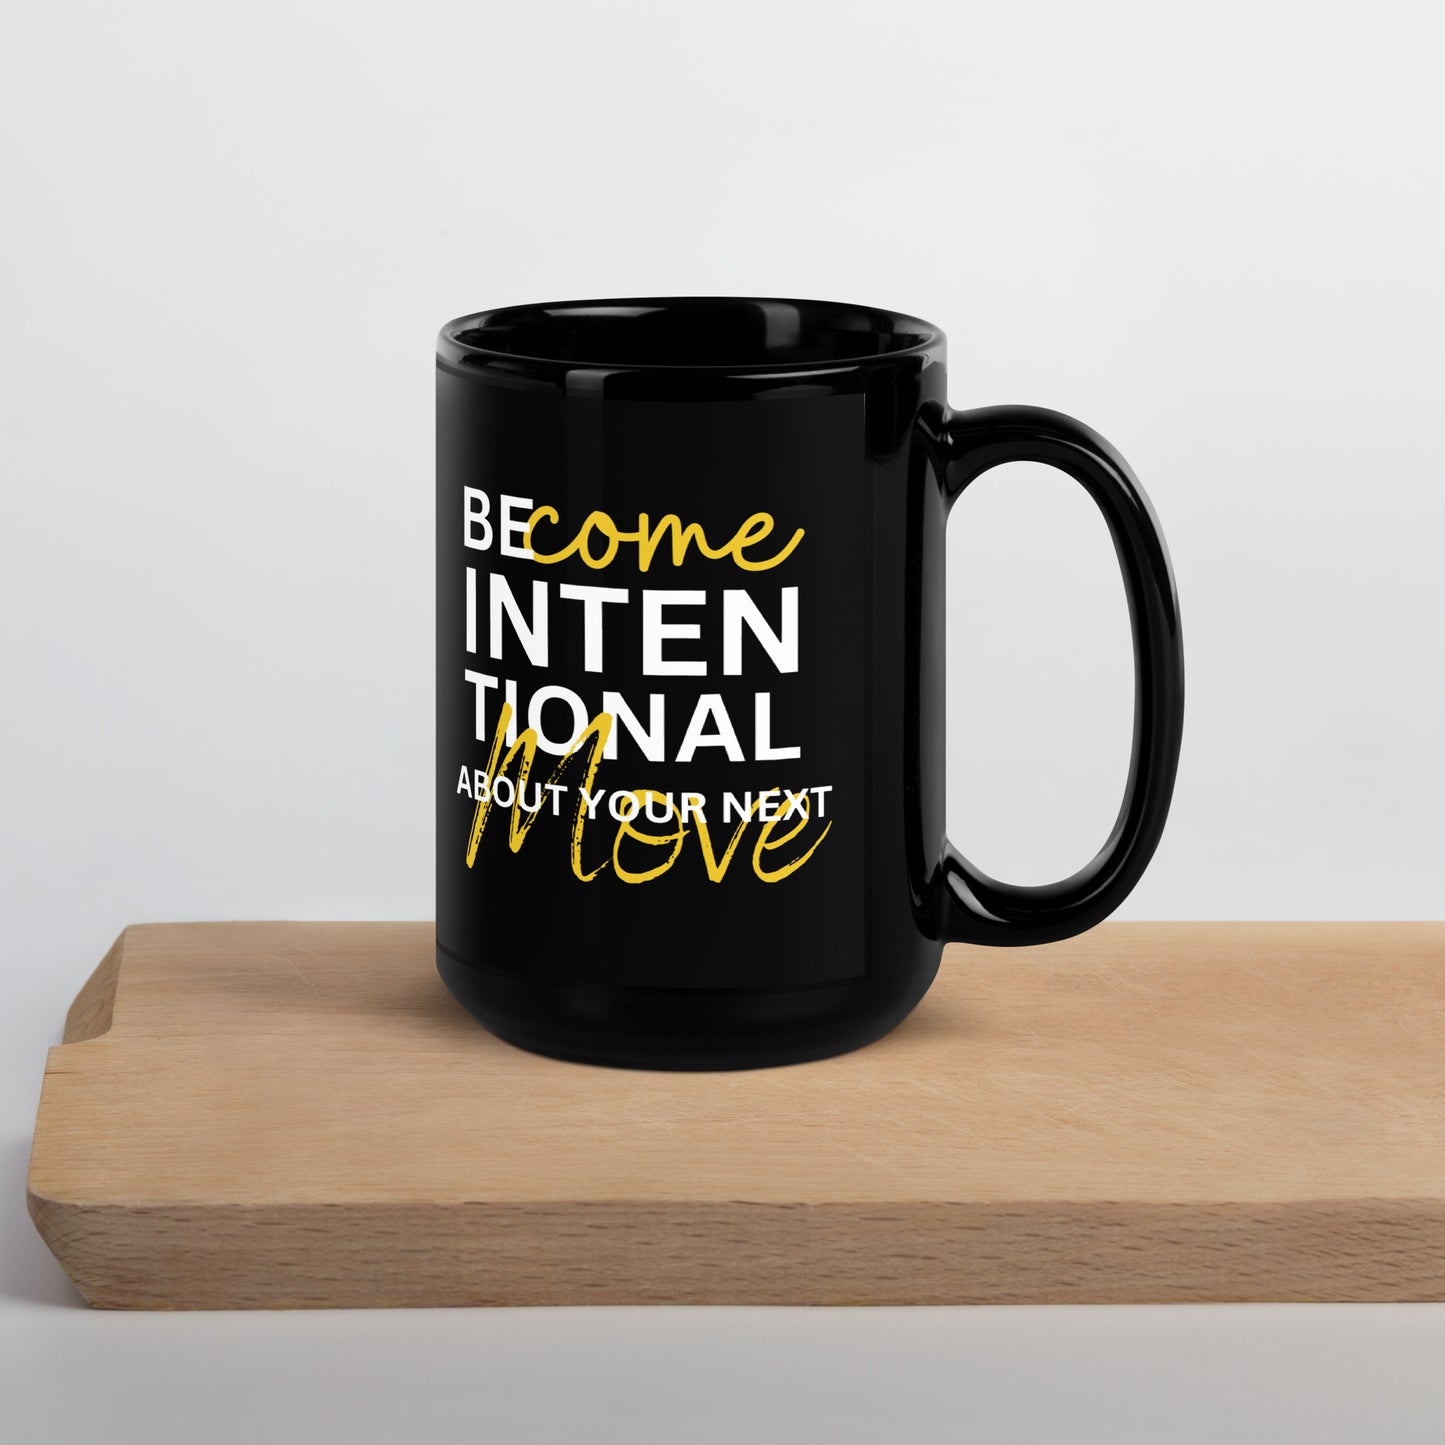 BECOME INTENTIONAL ABOUT YOUR NEXT MOVE - Black Glossy Mug